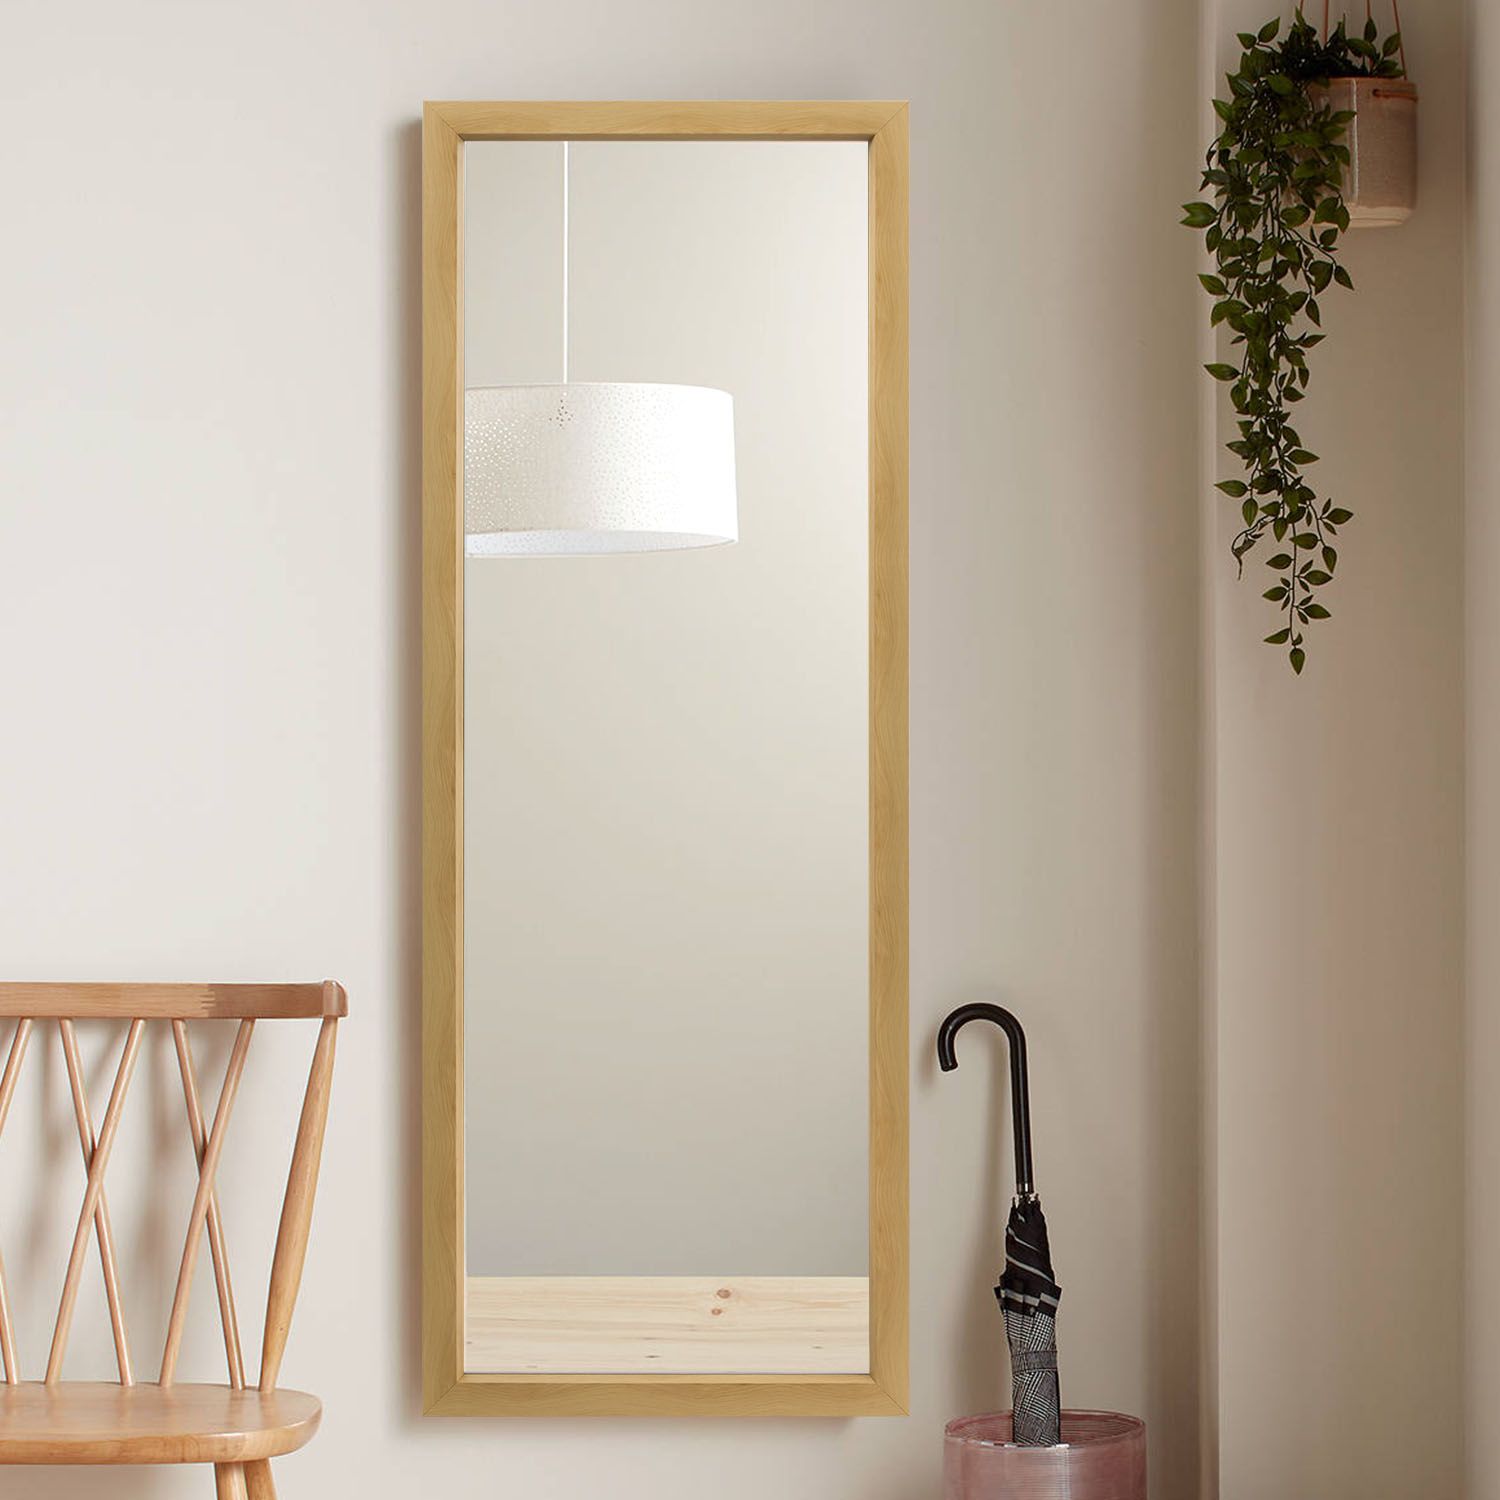 Full Length Mirror Floor Mirror With Standing Holder Hanging/leaning For Full Length Floor Mirrors (View 3 of 15)